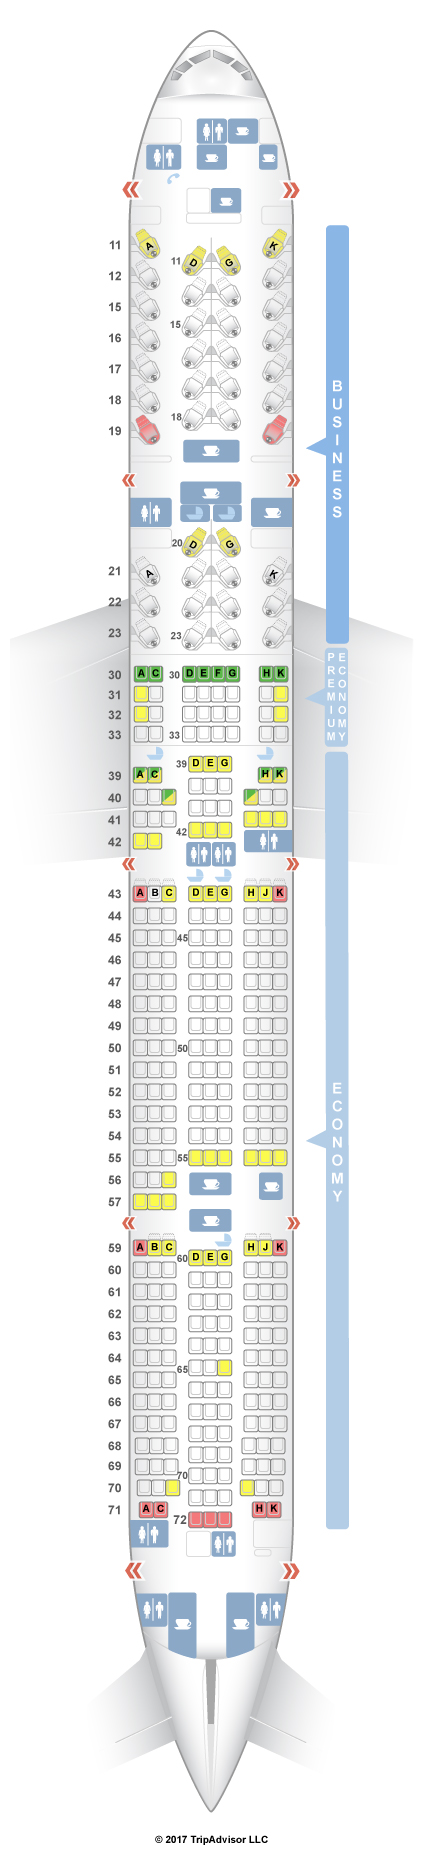 cathay pacific seat assignment